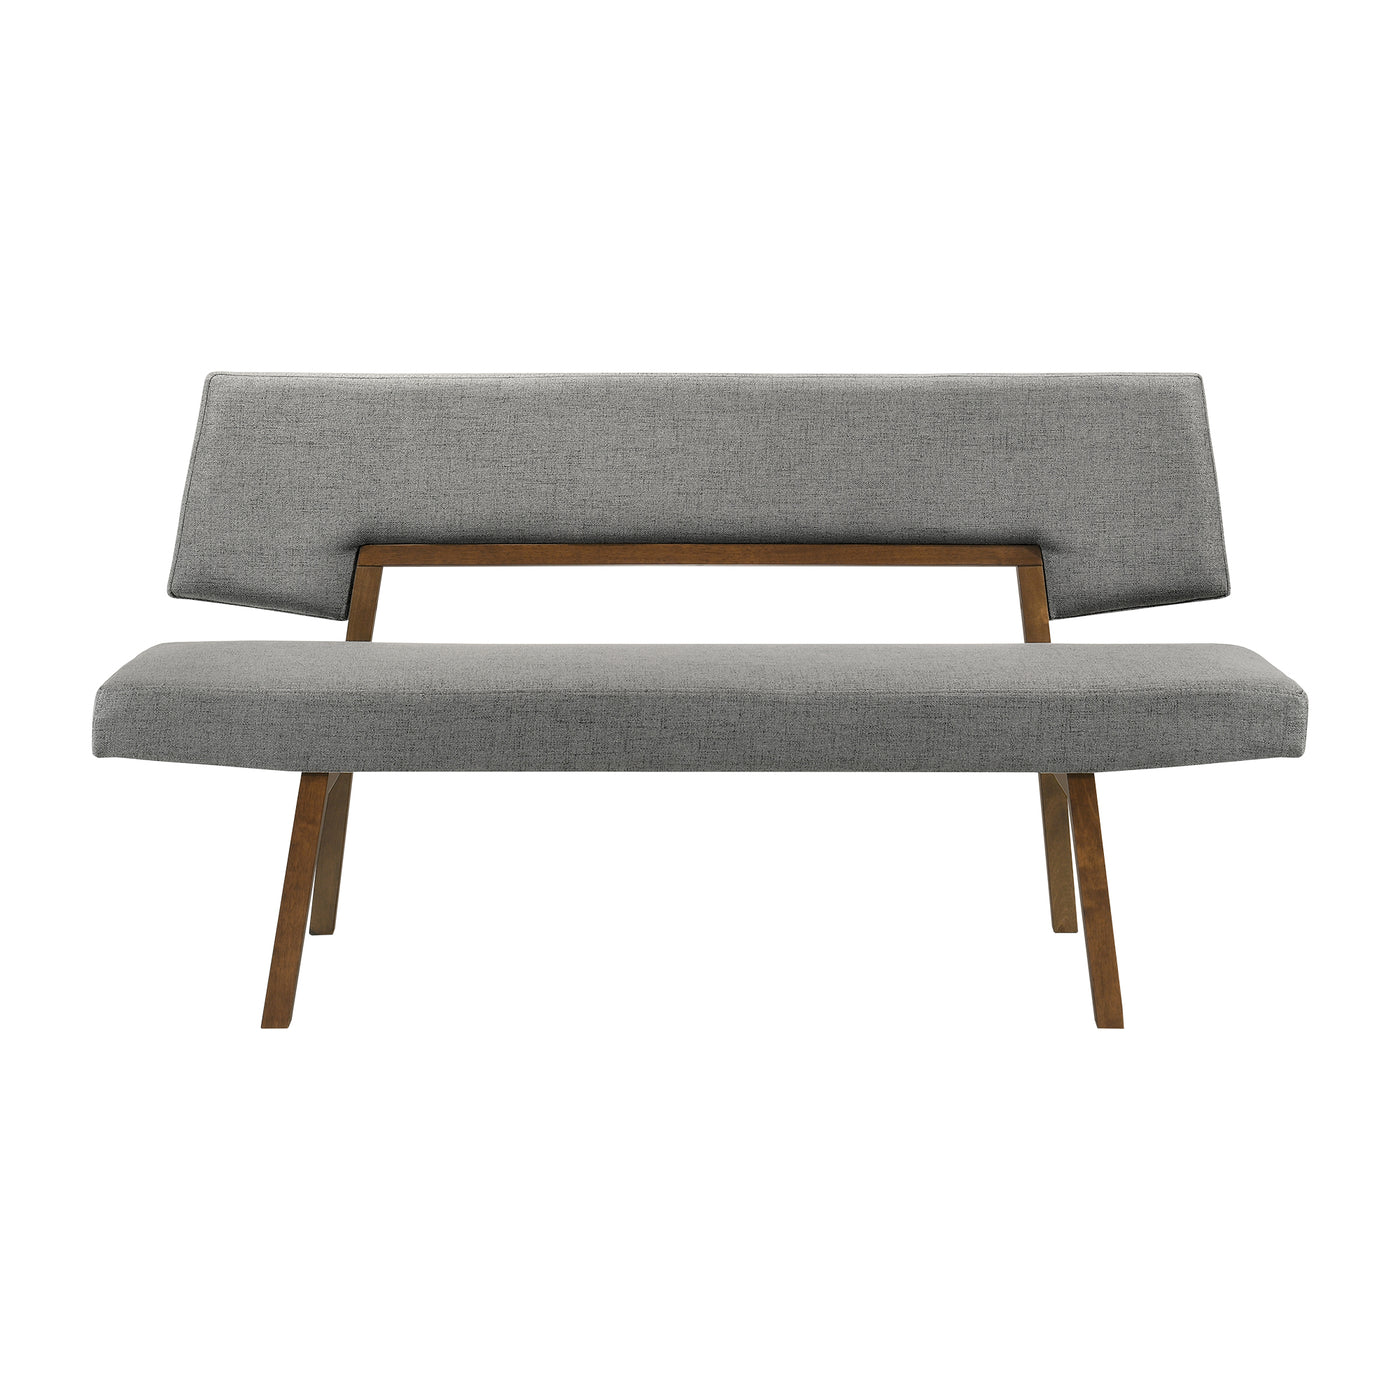 Channell Upholstered Wood Dining Bench